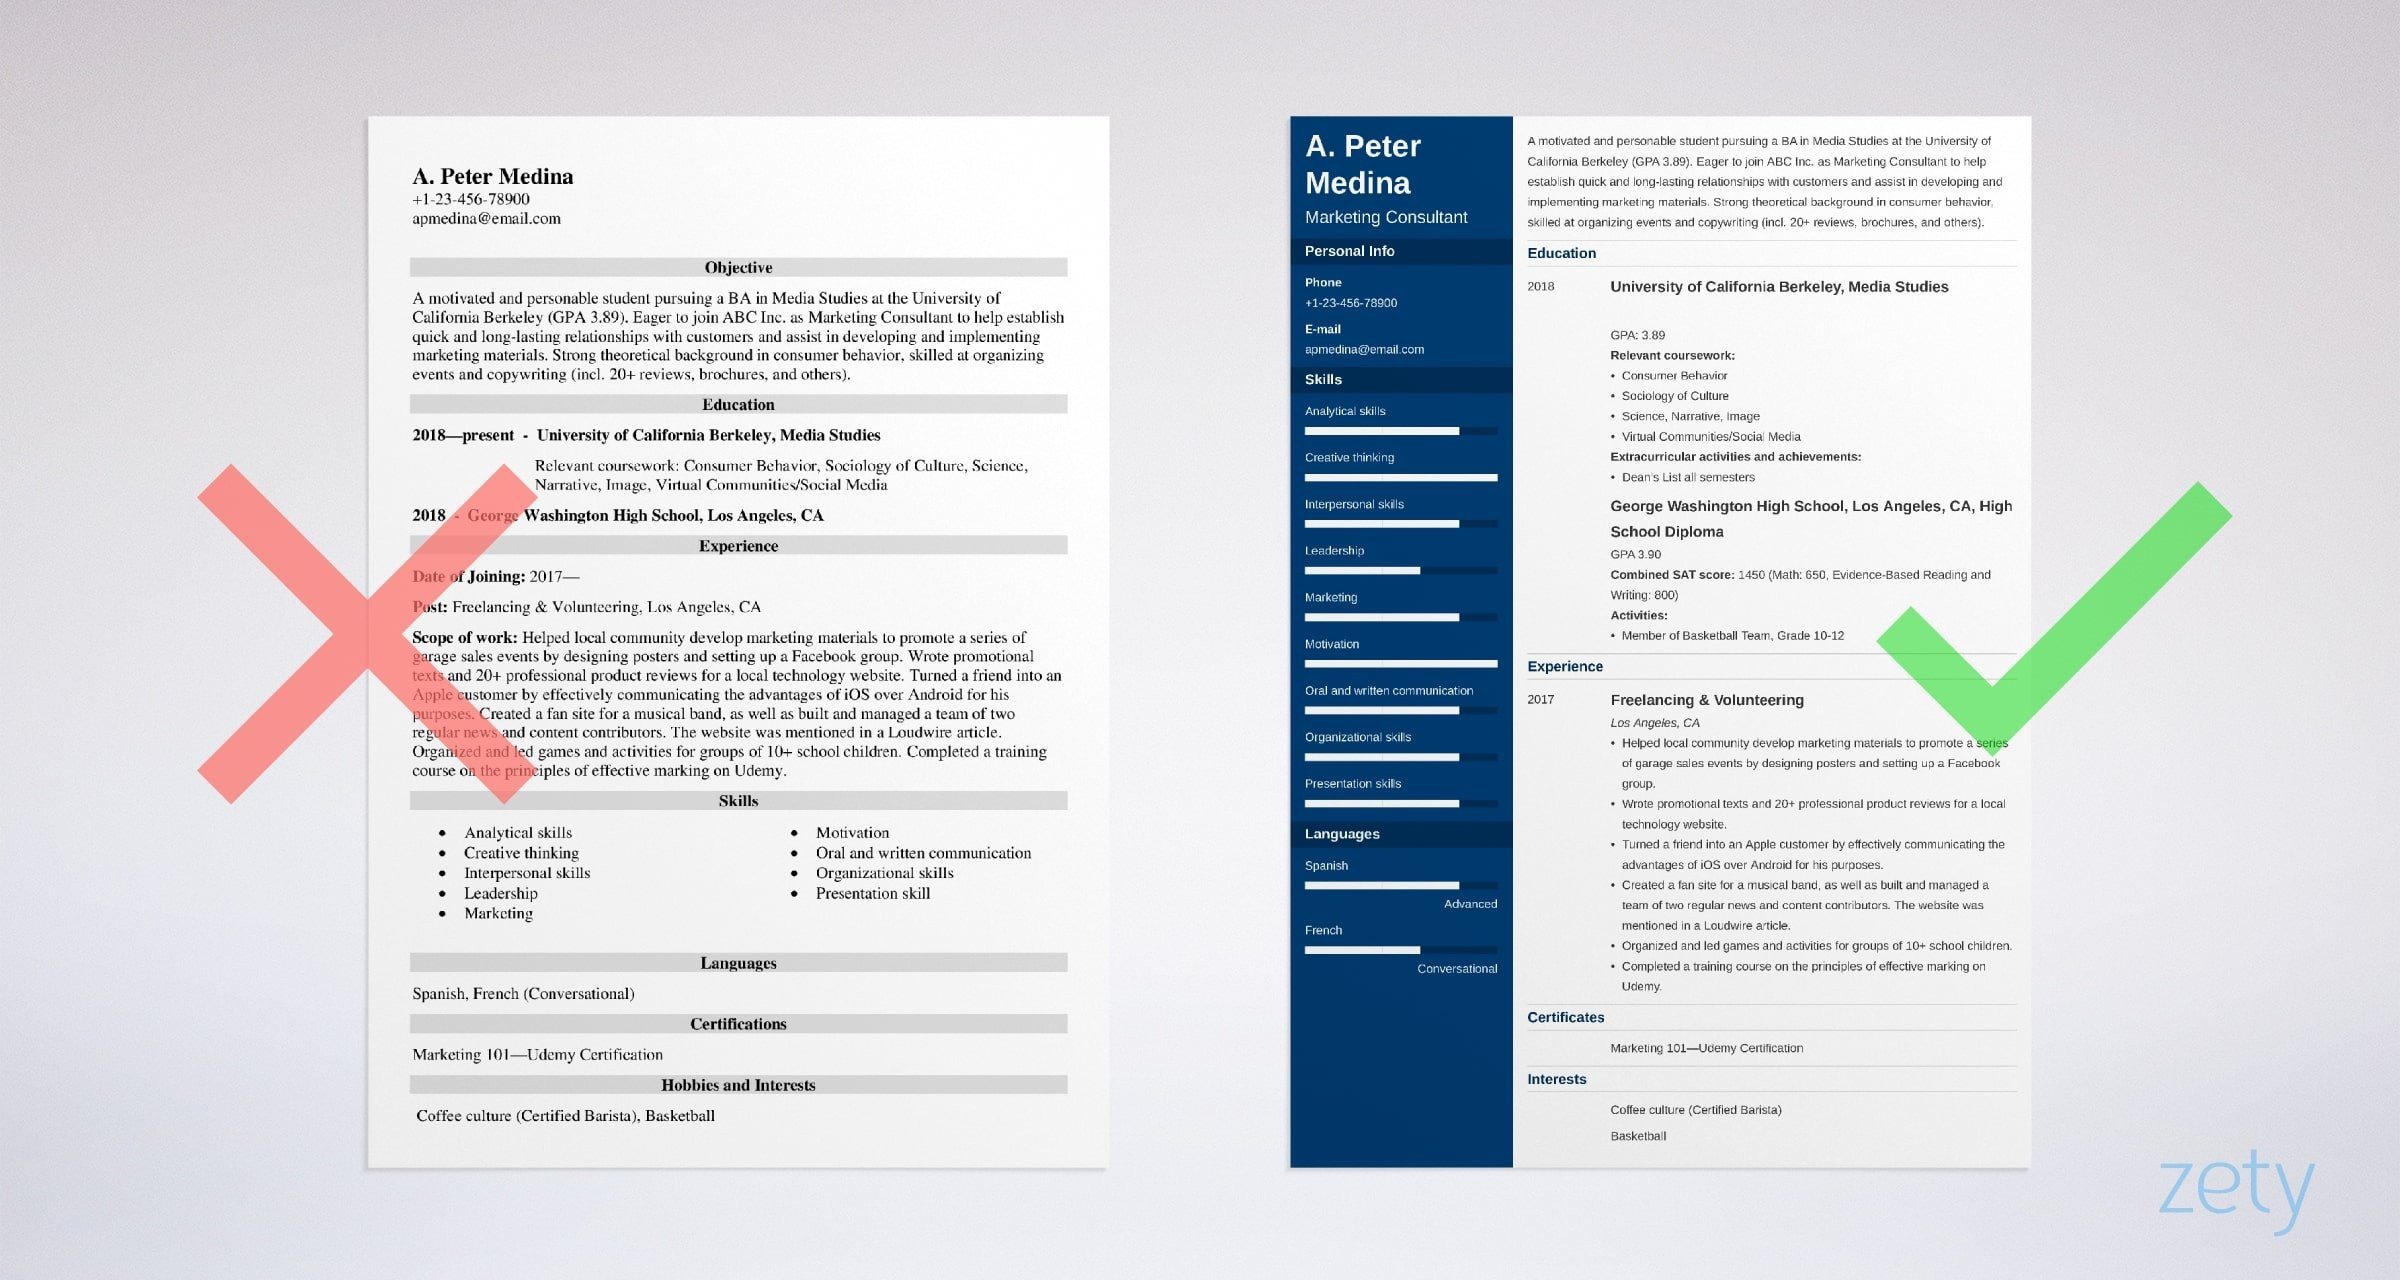 Resume Template for someone with Little Work Experience How to Write A Resume with No Experience & Get the First Job